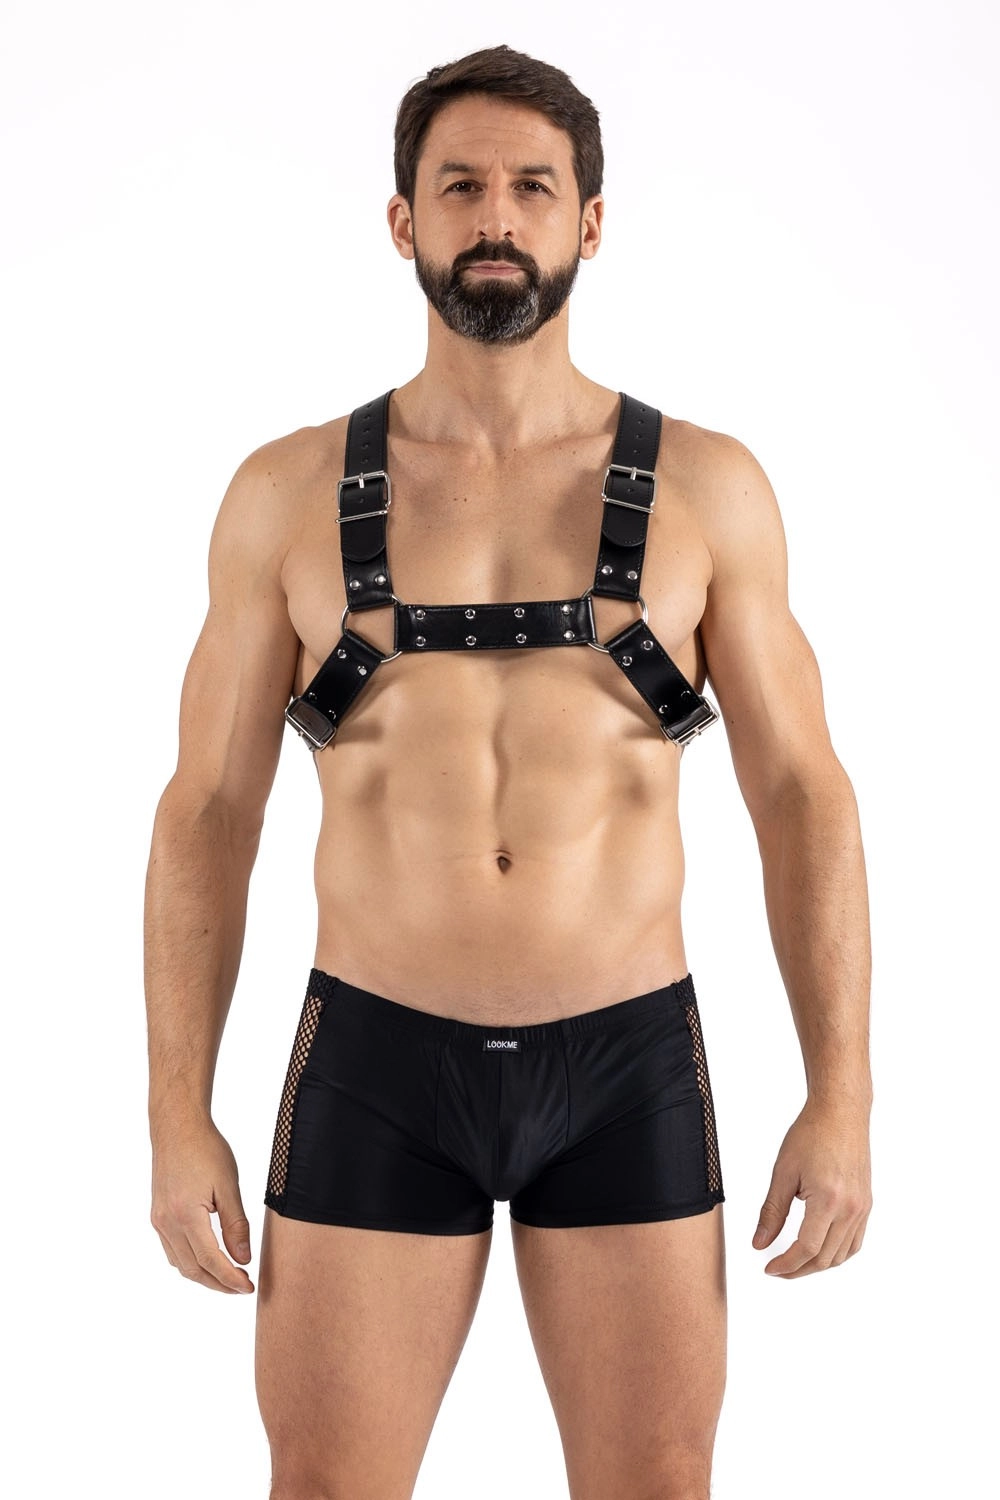 VISION x Harness in Schwarz Model " CLASSIC ", Gay Harness 